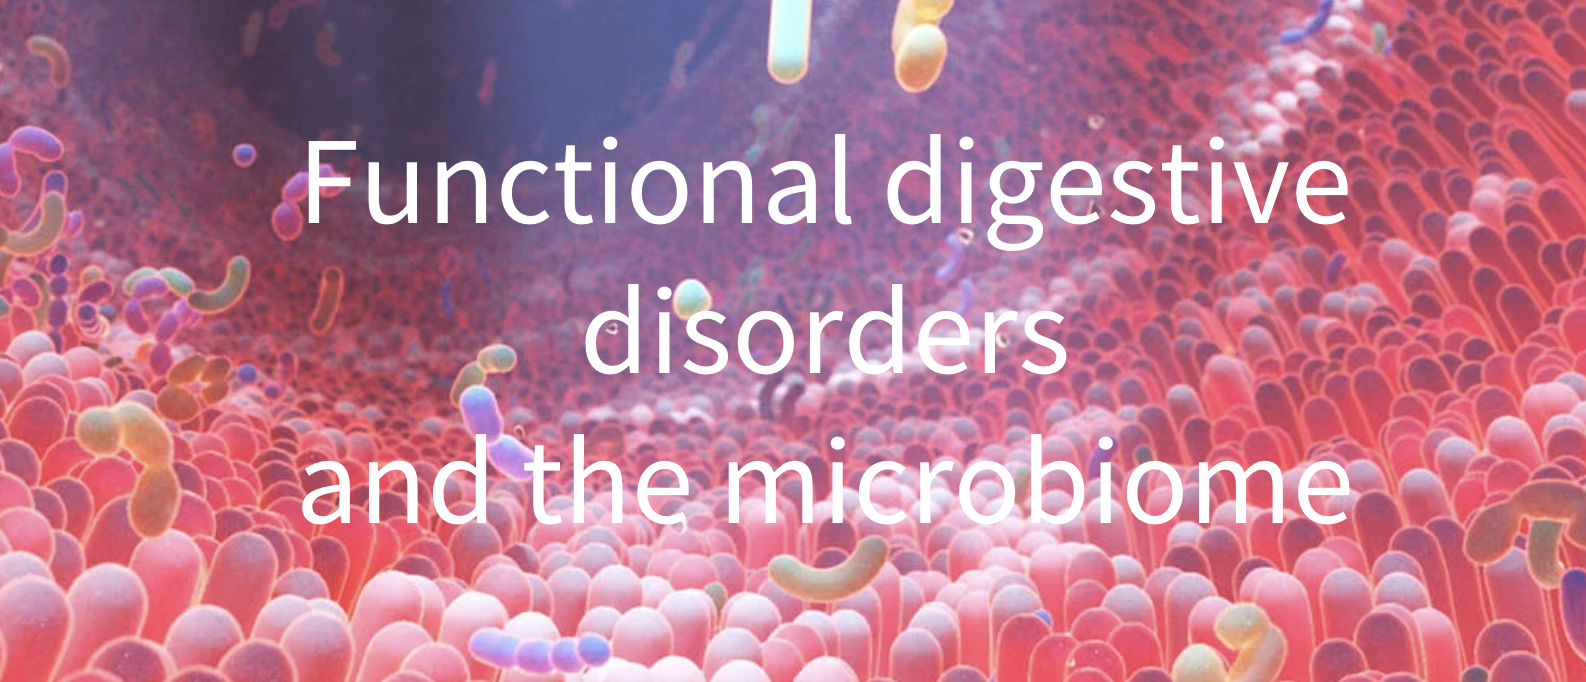 Functional digestive disorders and the microbiome